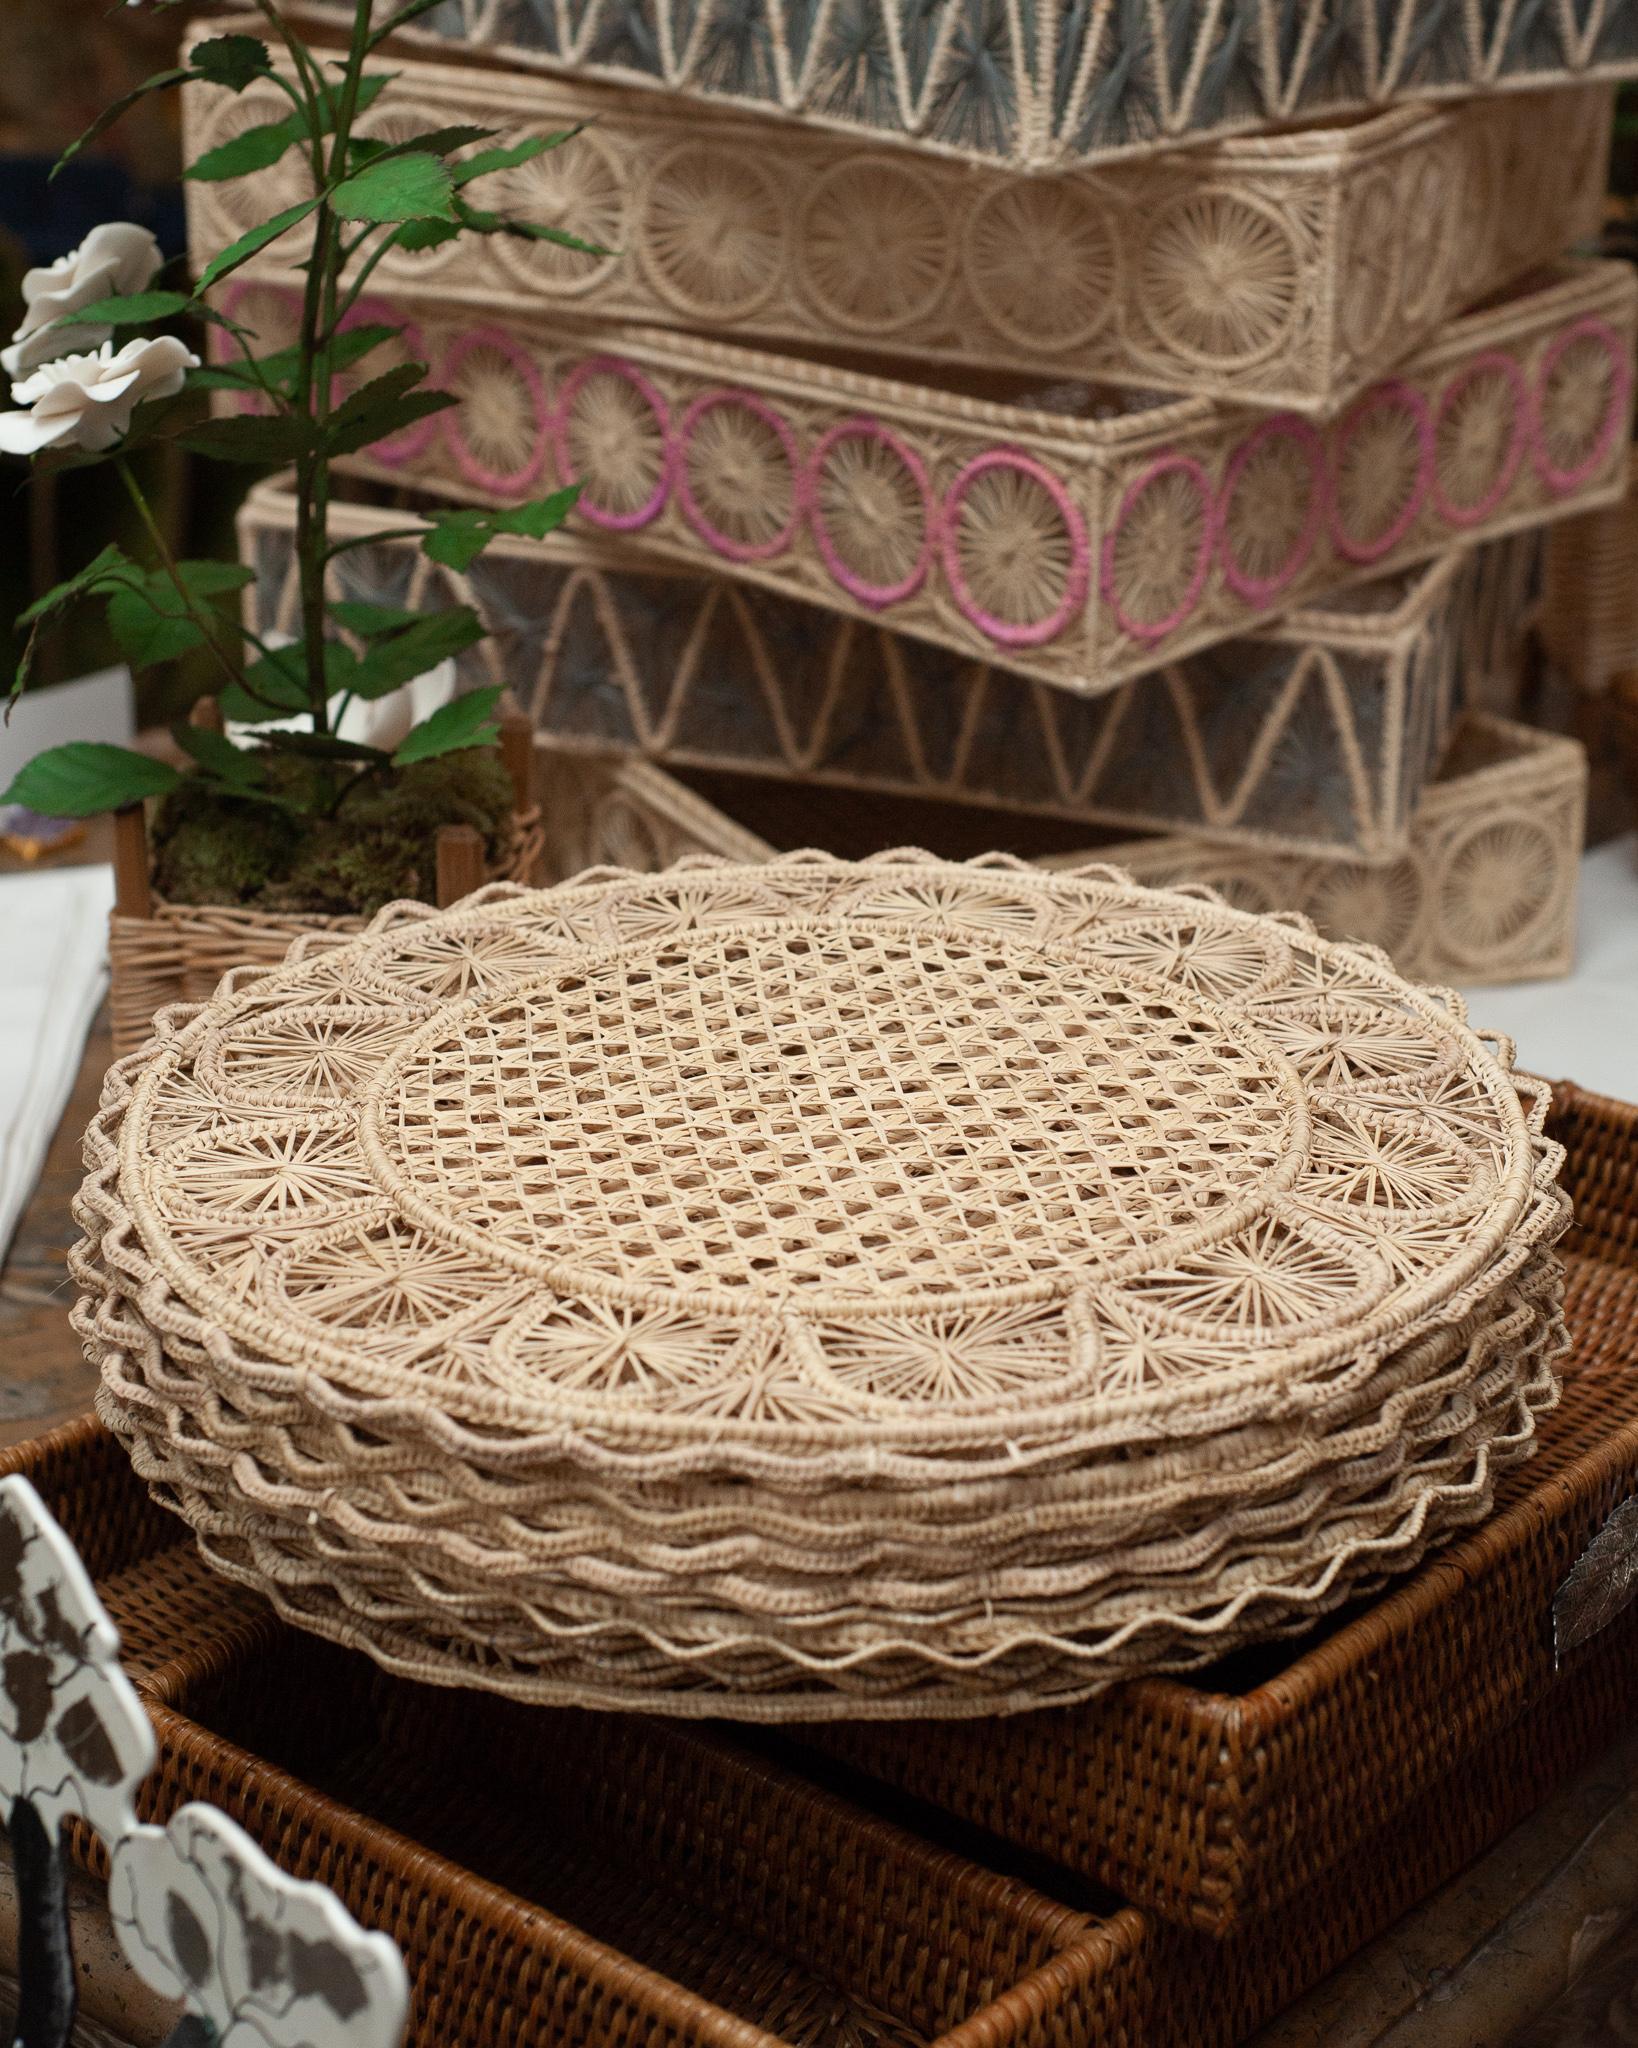 South American Contemporary Set of 6 Handwoven Natural Rattan Placemats